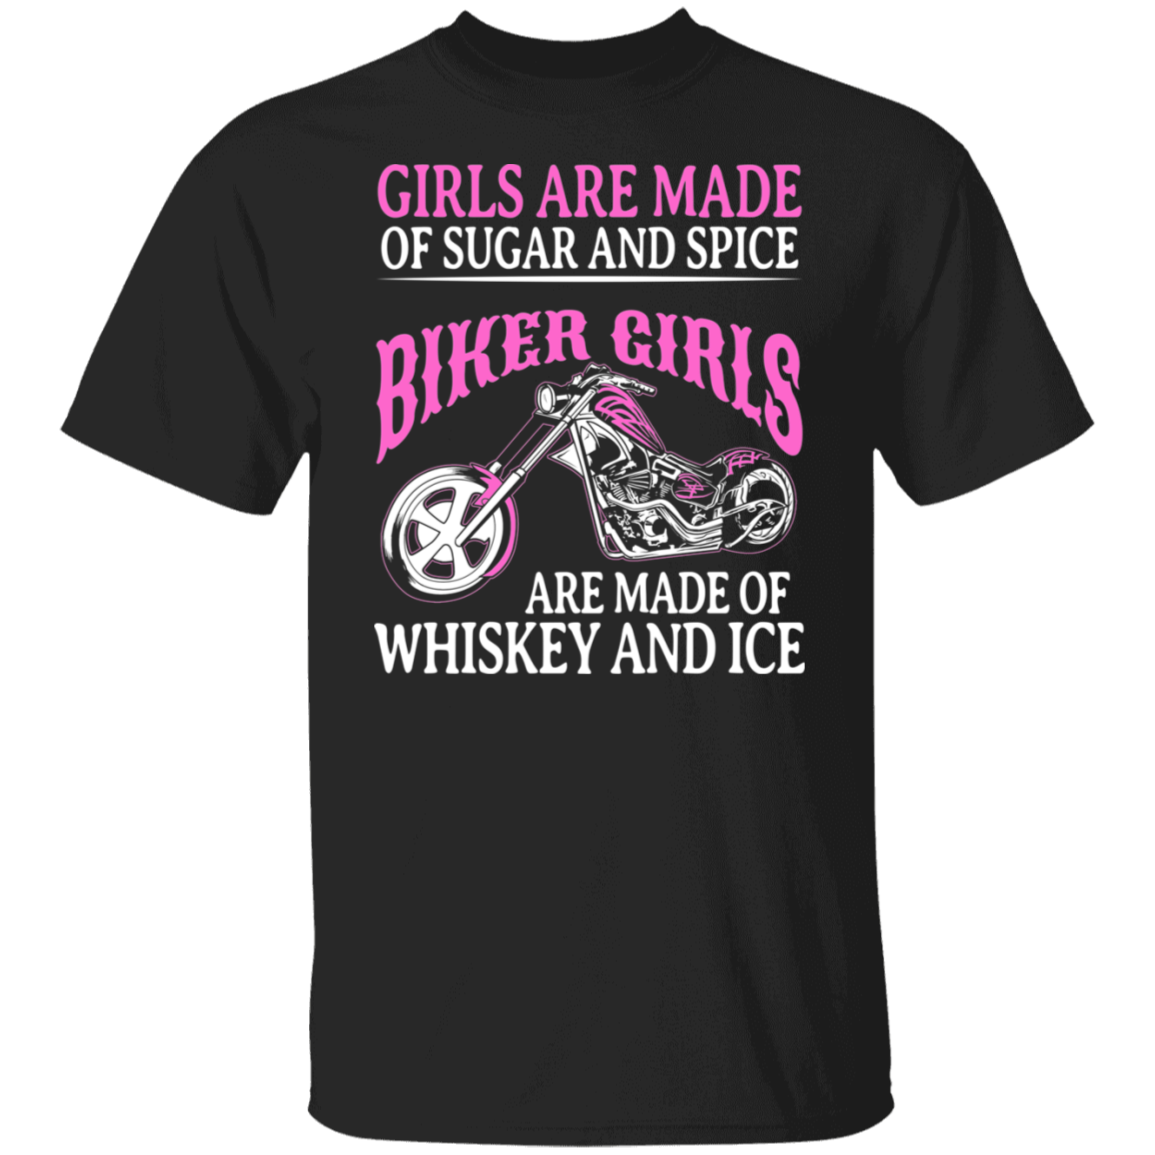 Biker girls are made of whisky and ice Shirt